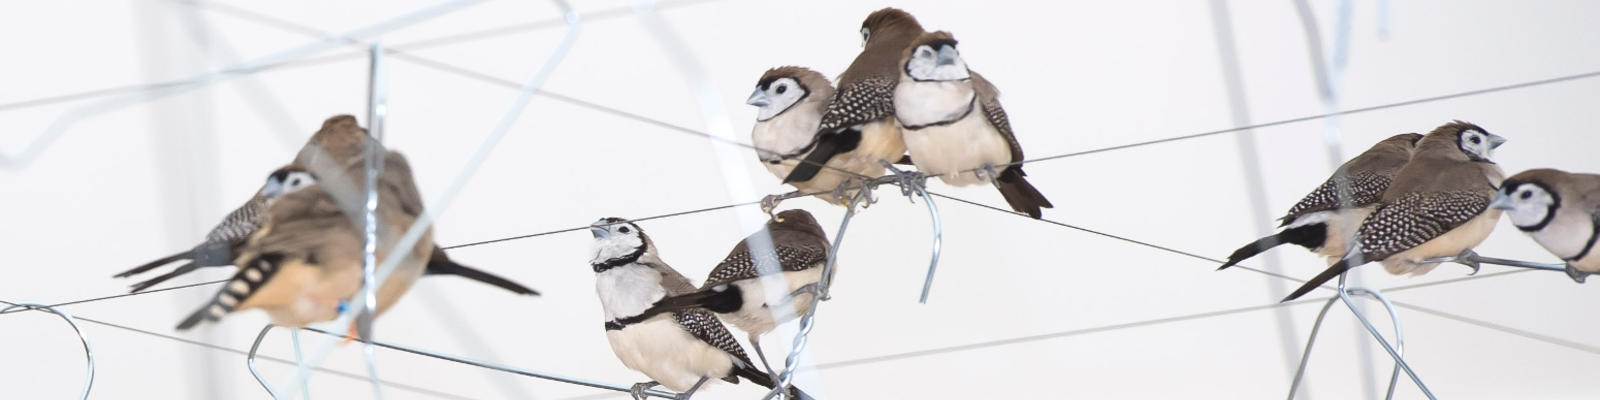 A close-up of finches on coathangers from Celeste Bourgier-Mougenot&#039;s artwork, From here to ear (v.13).